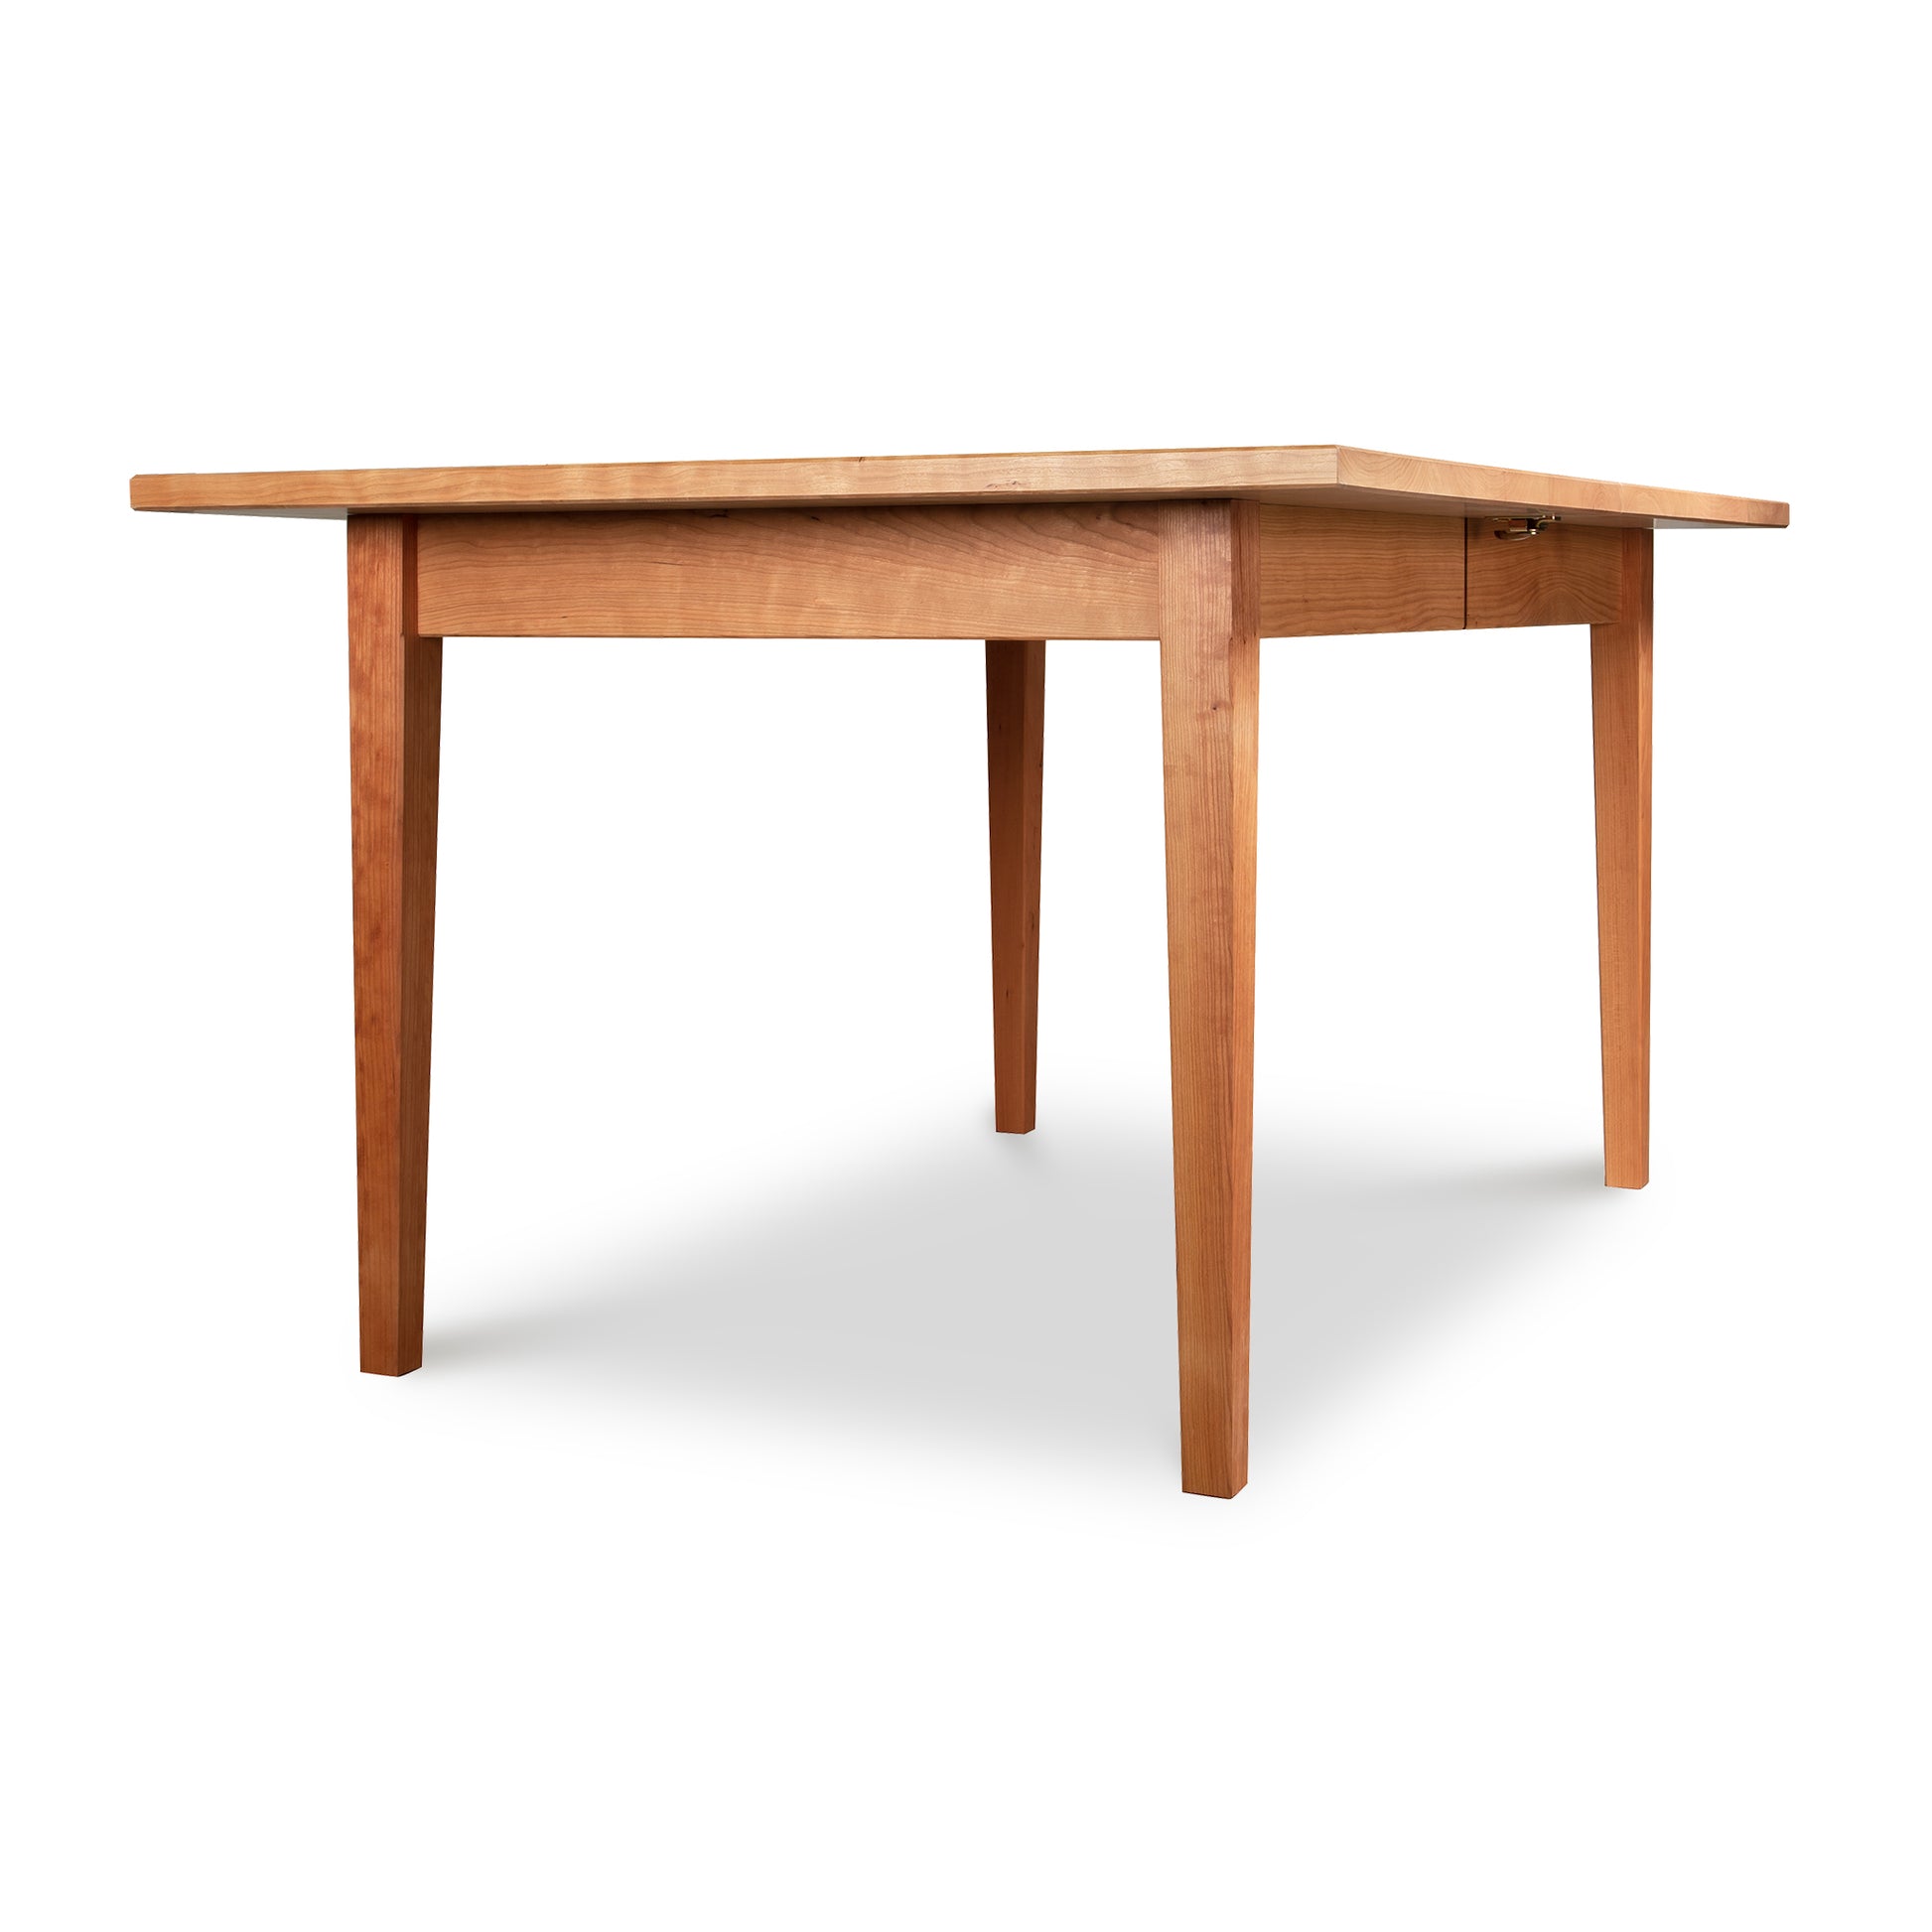 A Vermont Shaker Rectangular Extension Dining Table - Clearance by Maple Corner Woodworks, with four legs, isolated on a white background.